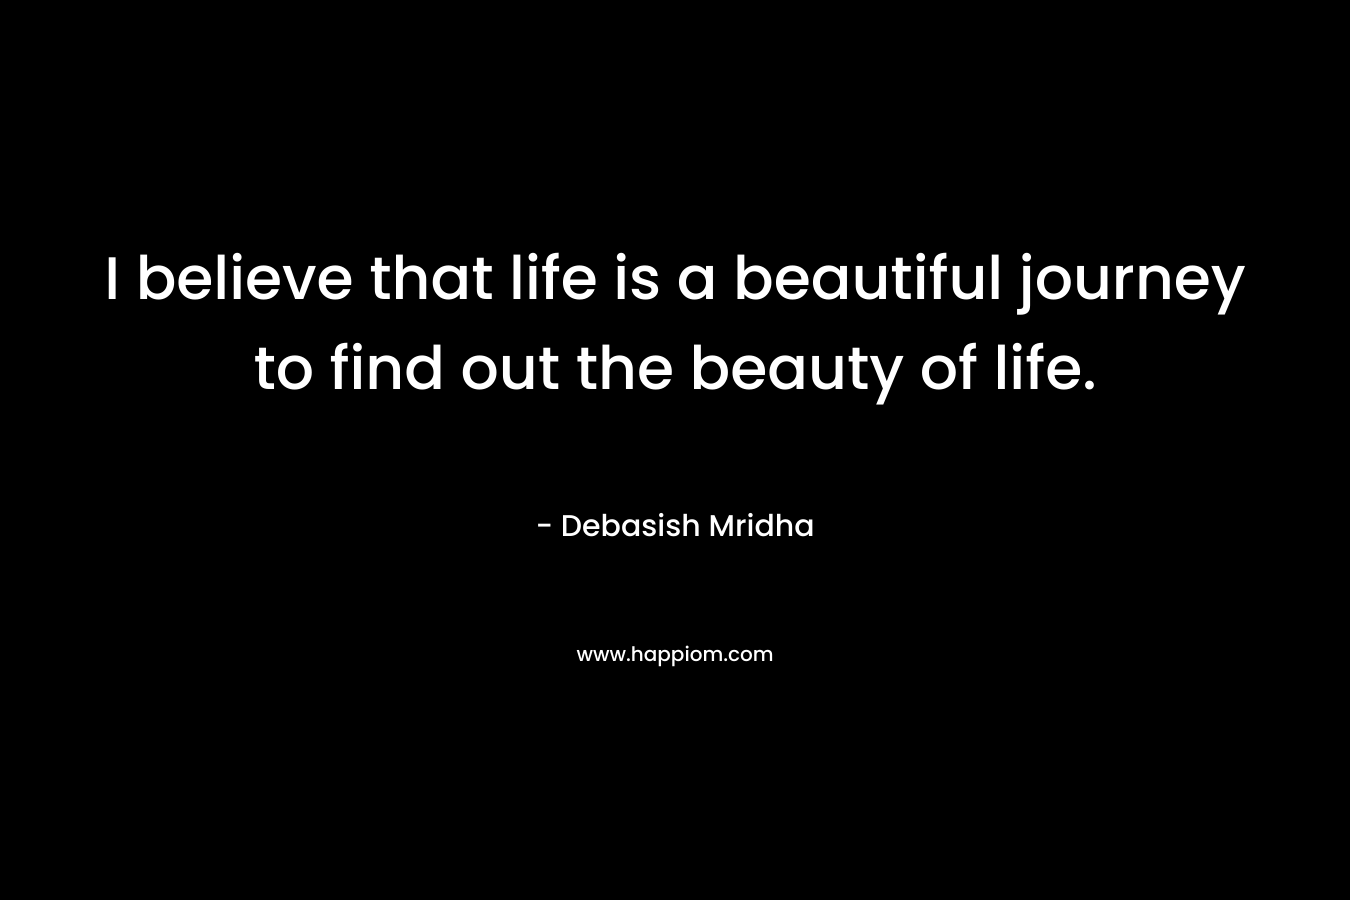 I believe that life is a beautiful journey to find out the beauty of life.